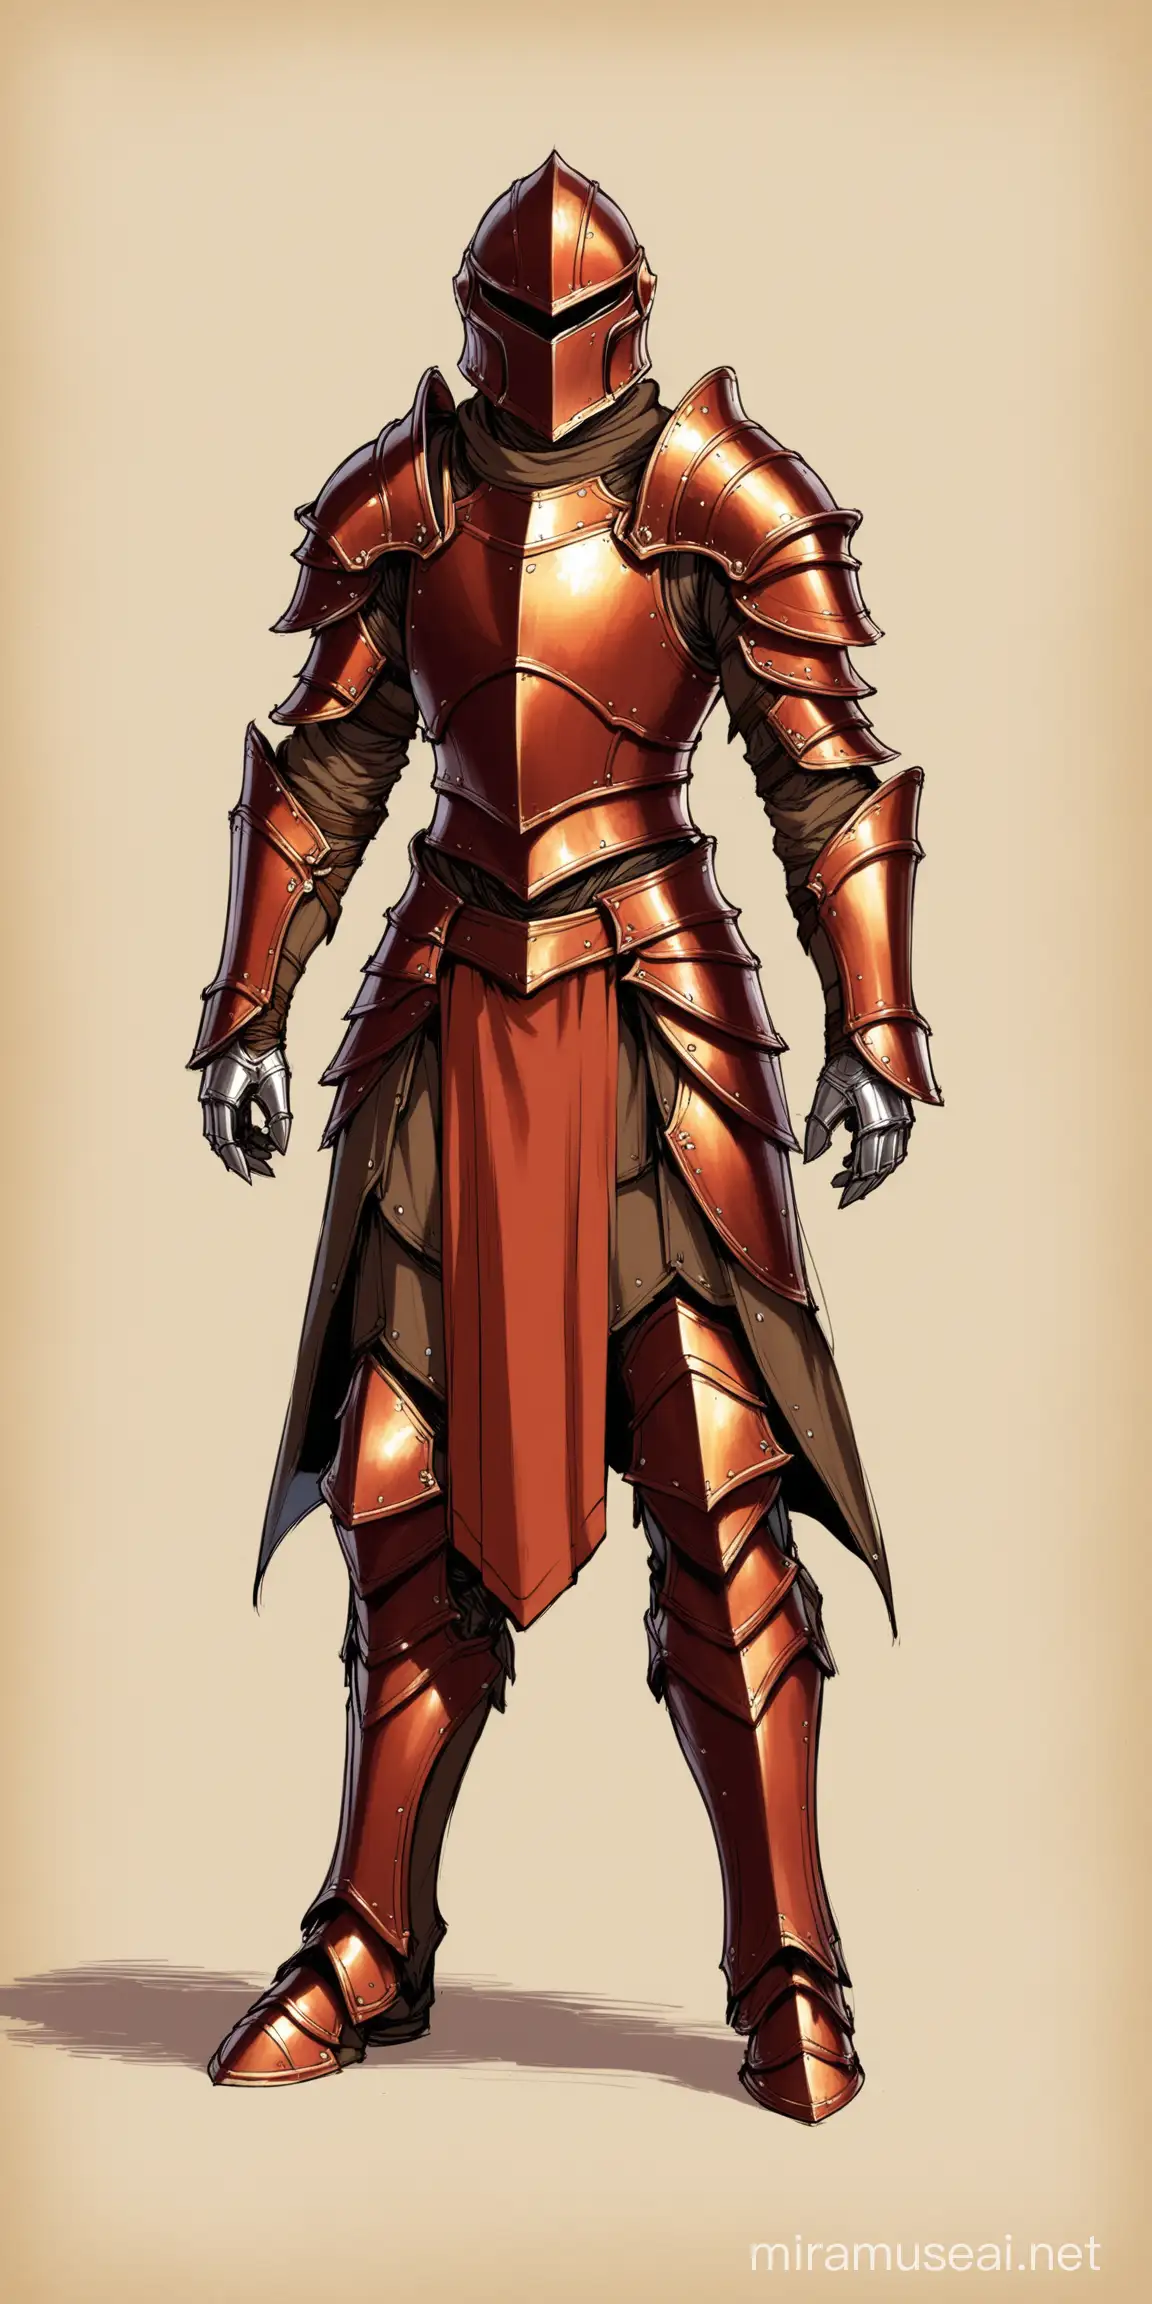 fantasy armor, male, iron, tan and brown and red, helmet, leather straps, fabric accents, concept art